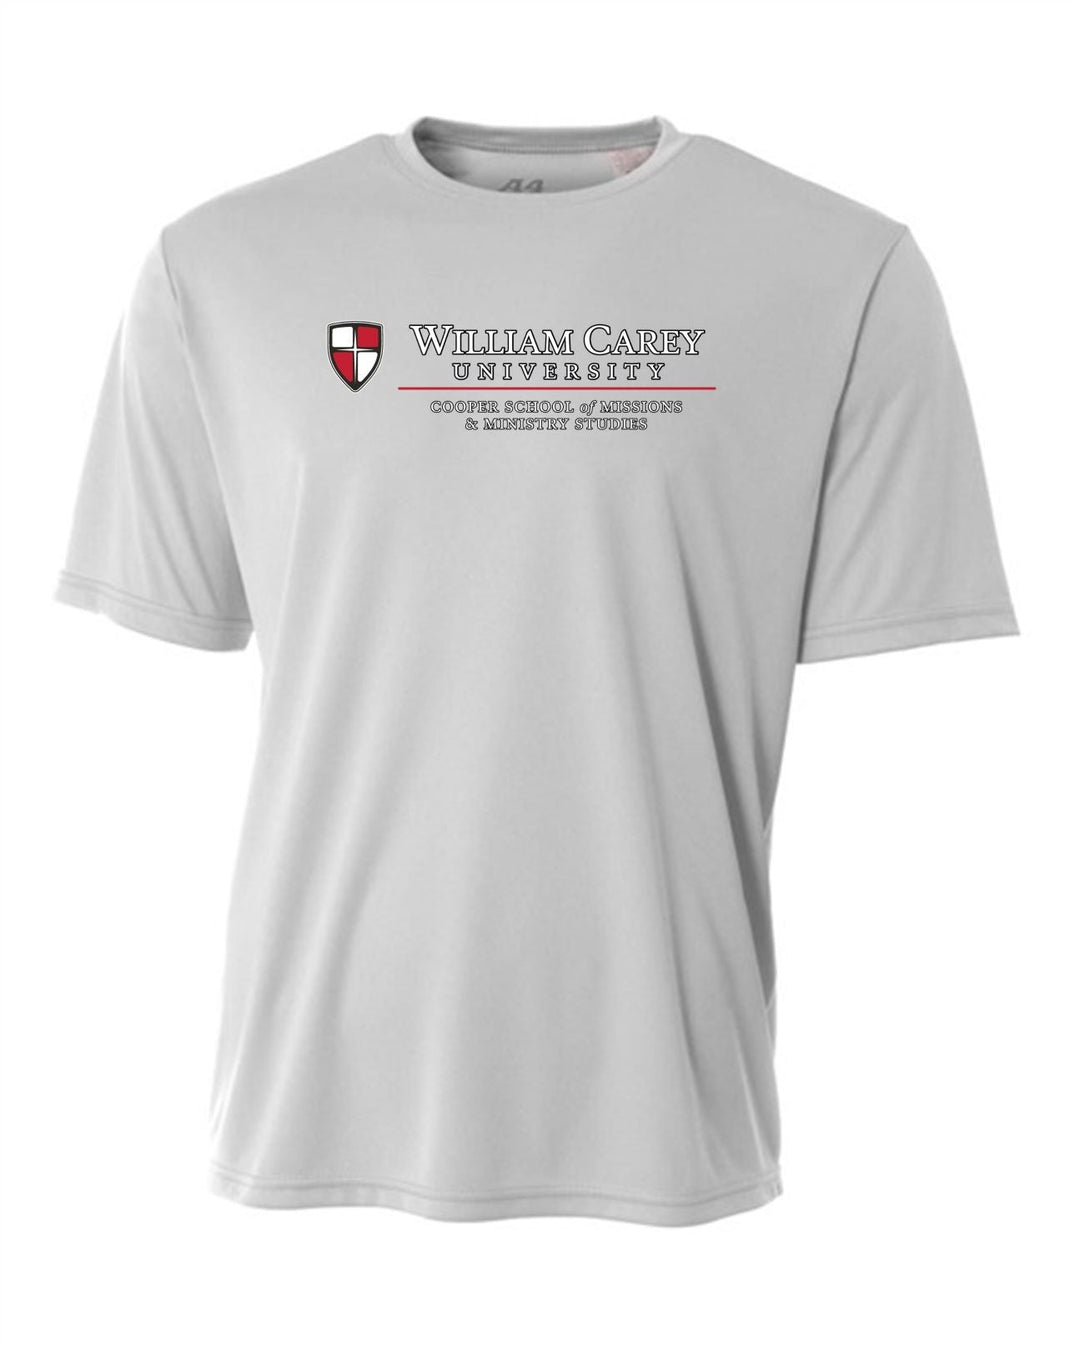 WCU Cooper School Of Missions & Ministry Youth Short-Sleeve Performance Shirt WCU CSMM Silver Grey Youth Small - Third Coast Soccer